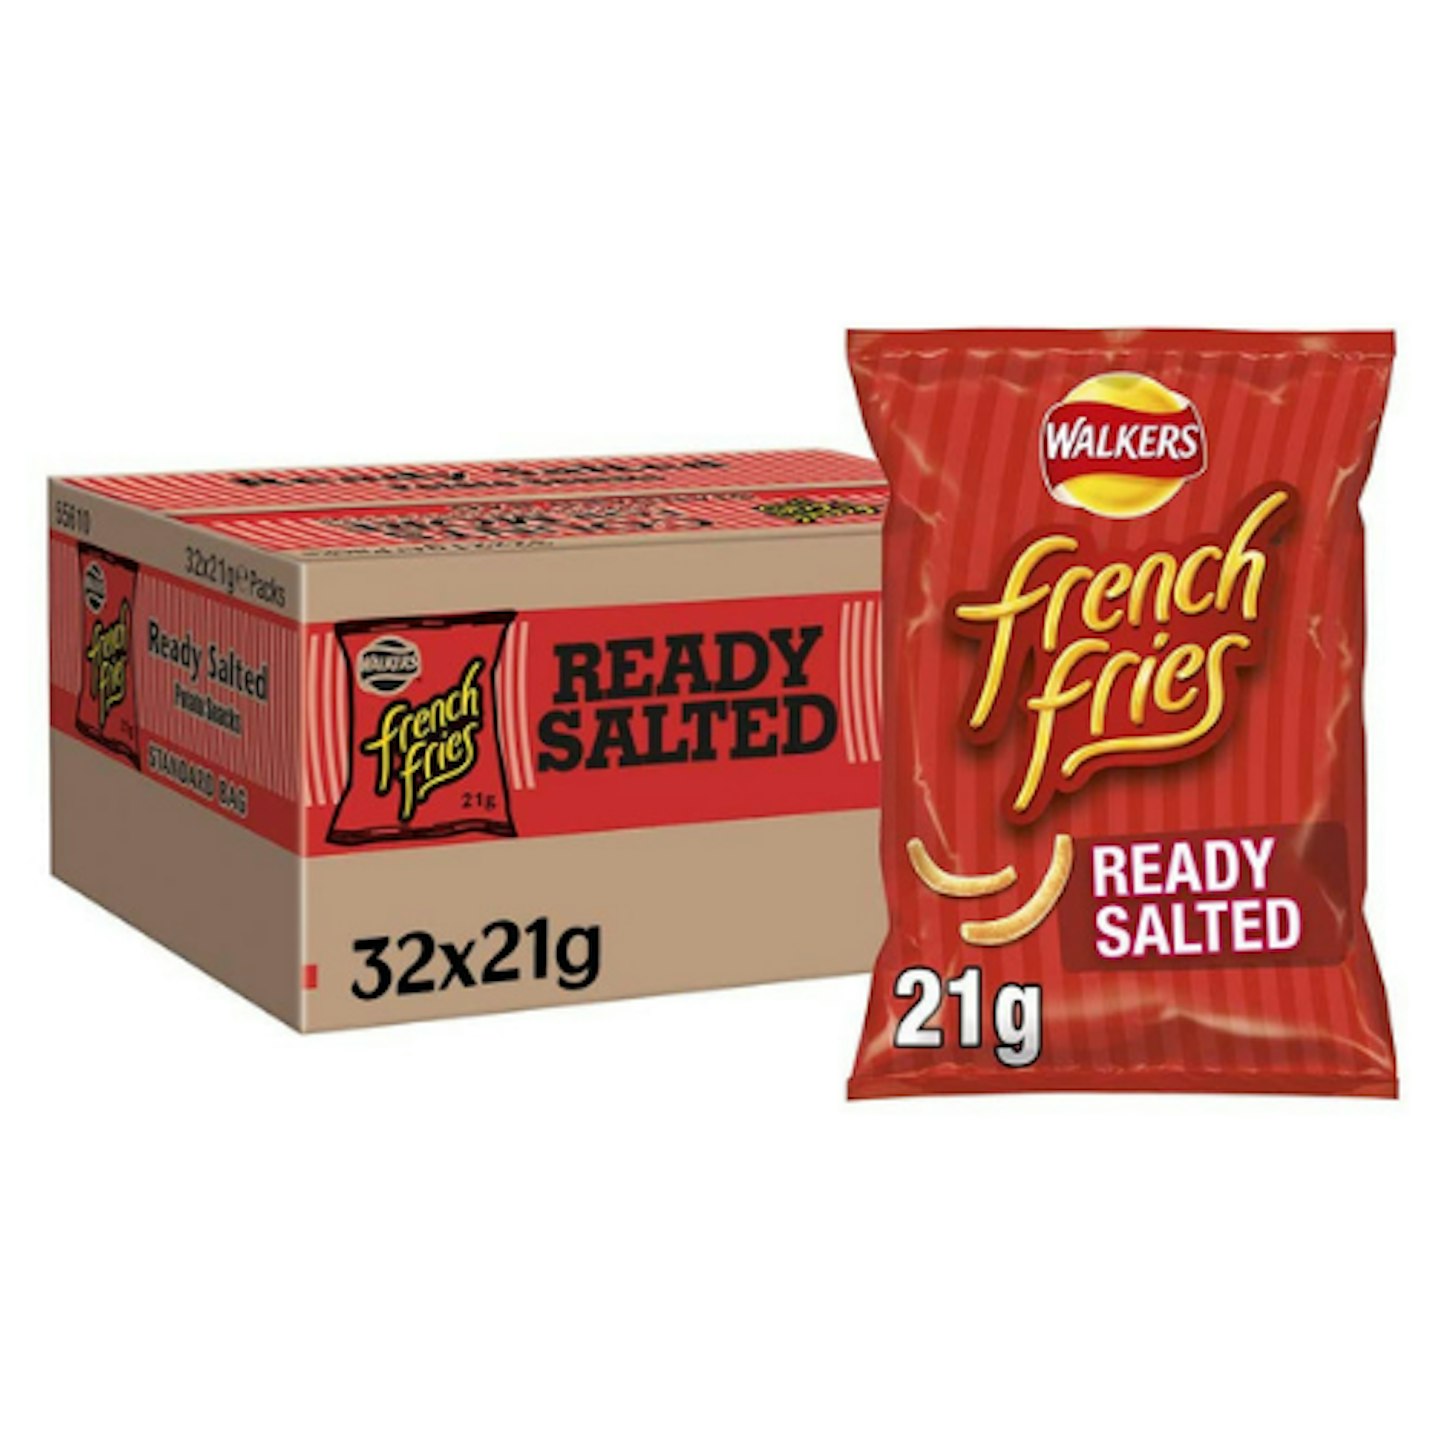 Walkers Crisps French Fries Ready Salted Snacks Box, 21 g (Case of 32)